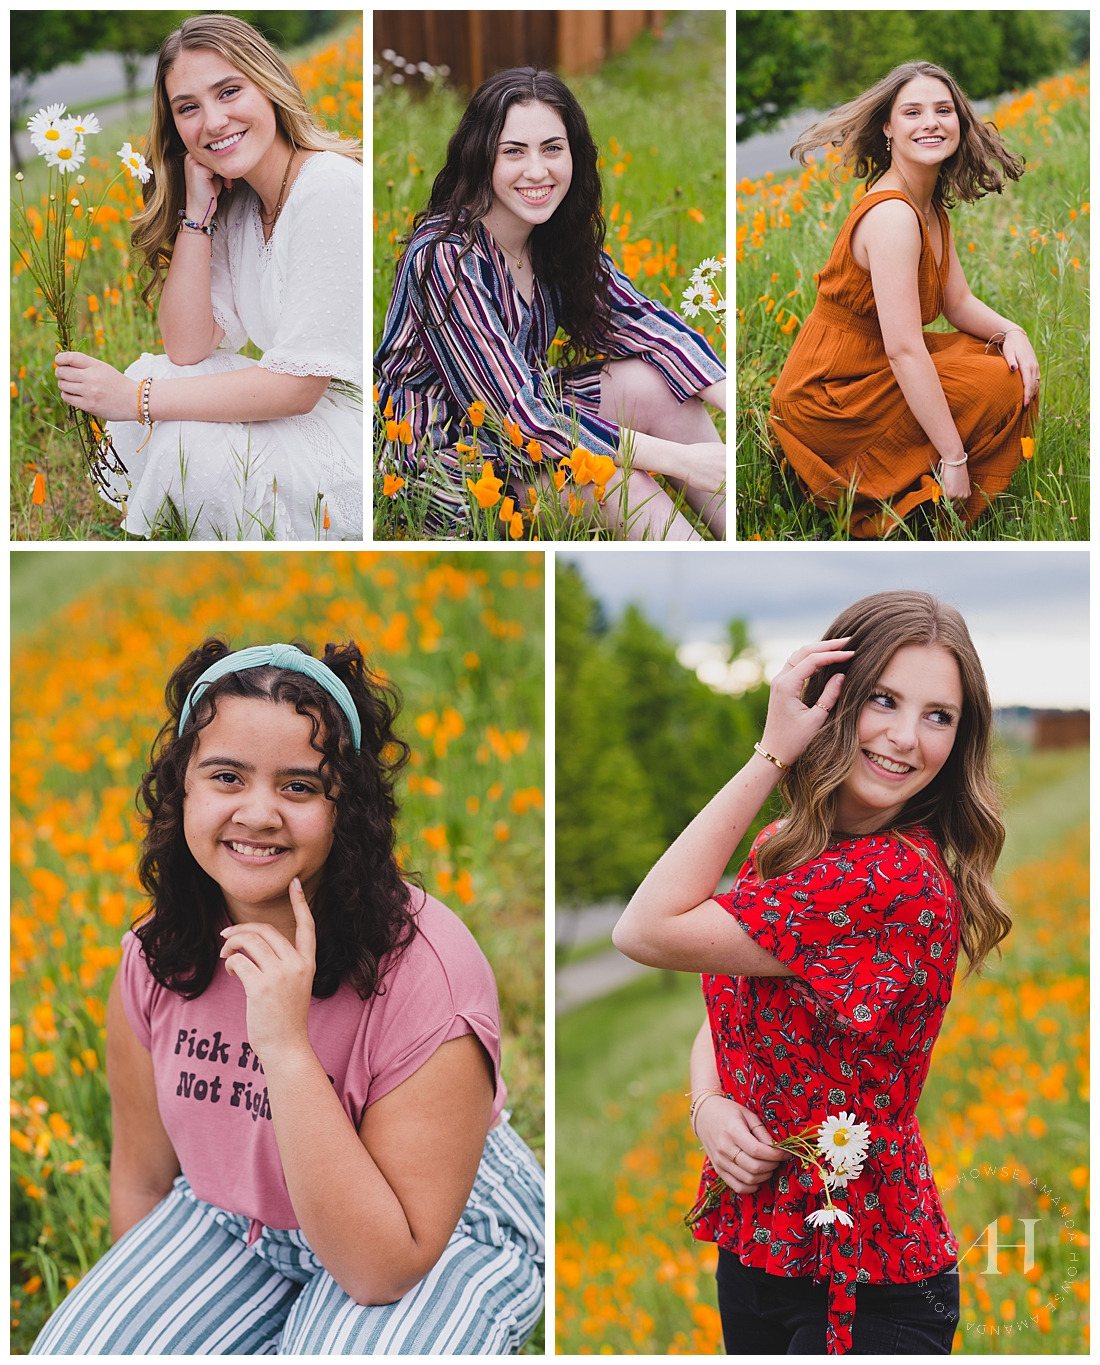 Themed Portrait in Field of Flowers | High School Senior Girl Poses, Outfit Inspiration | Photographed by Tacoma's Best High School Senior Photographer Amanda Howse